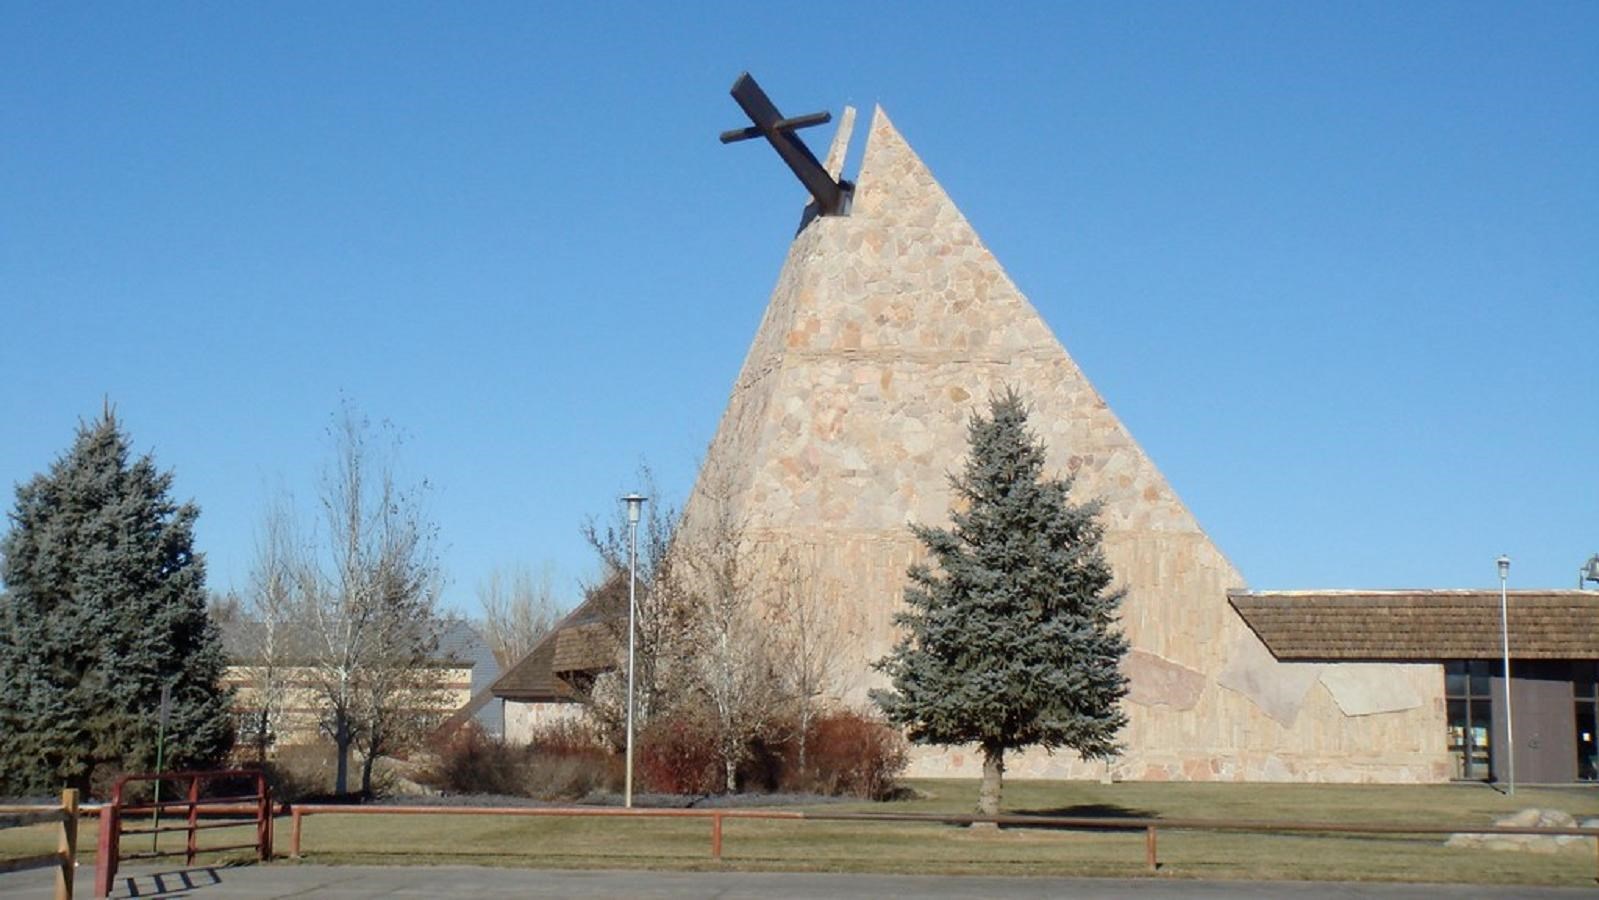 A tan stone teepee shaped structure with a brown cross protruding from its top.